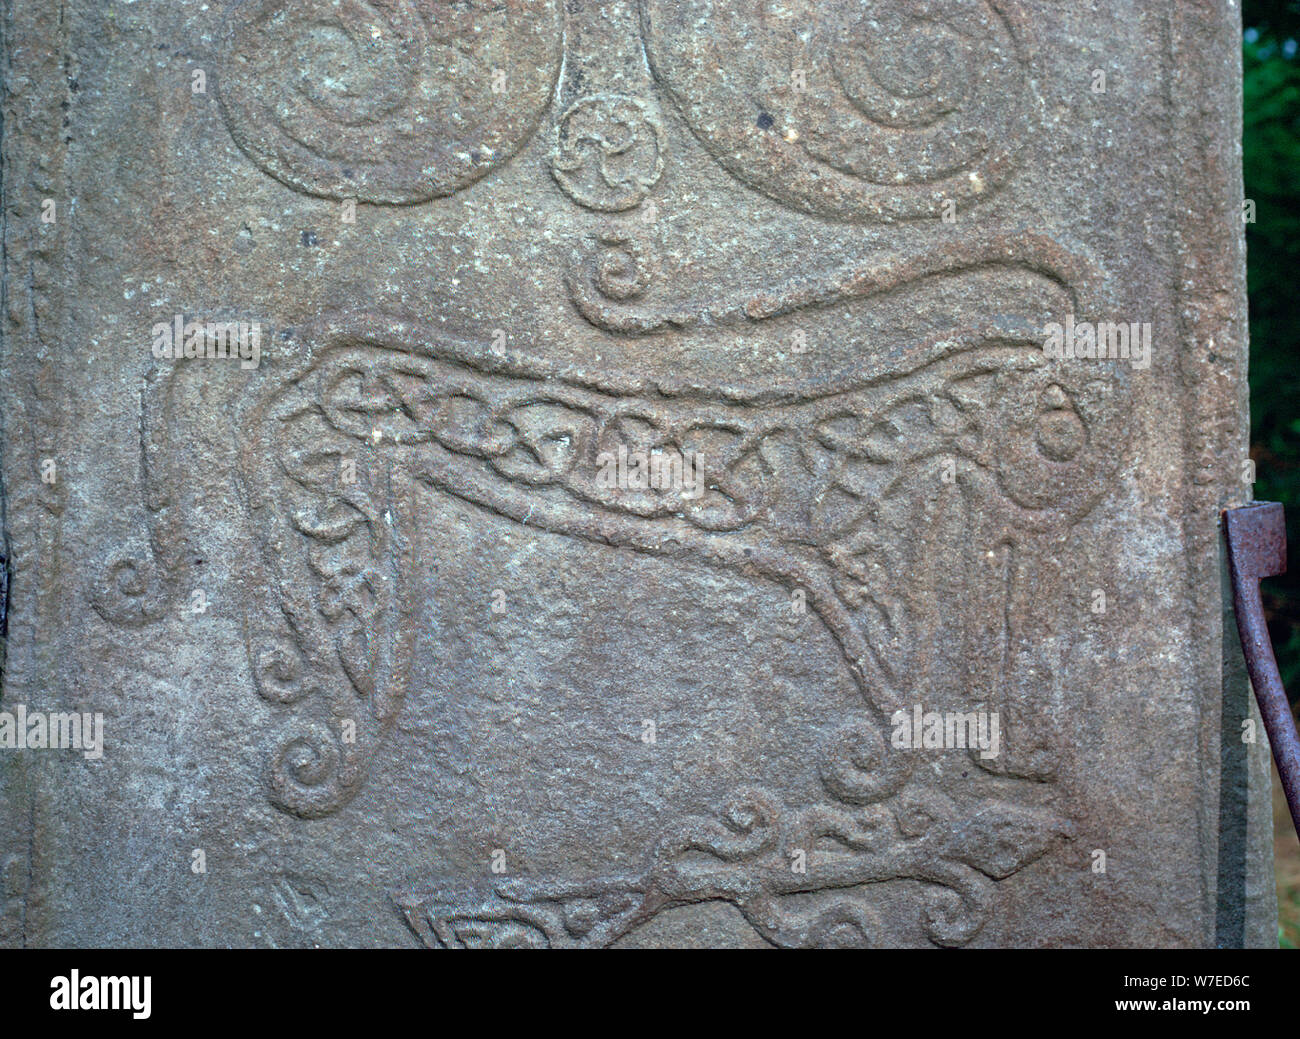 Detail of a Pictish carved stone showing the 'Pictish Beast' symbol, 6th century. Artist: Unknown Stock Photo